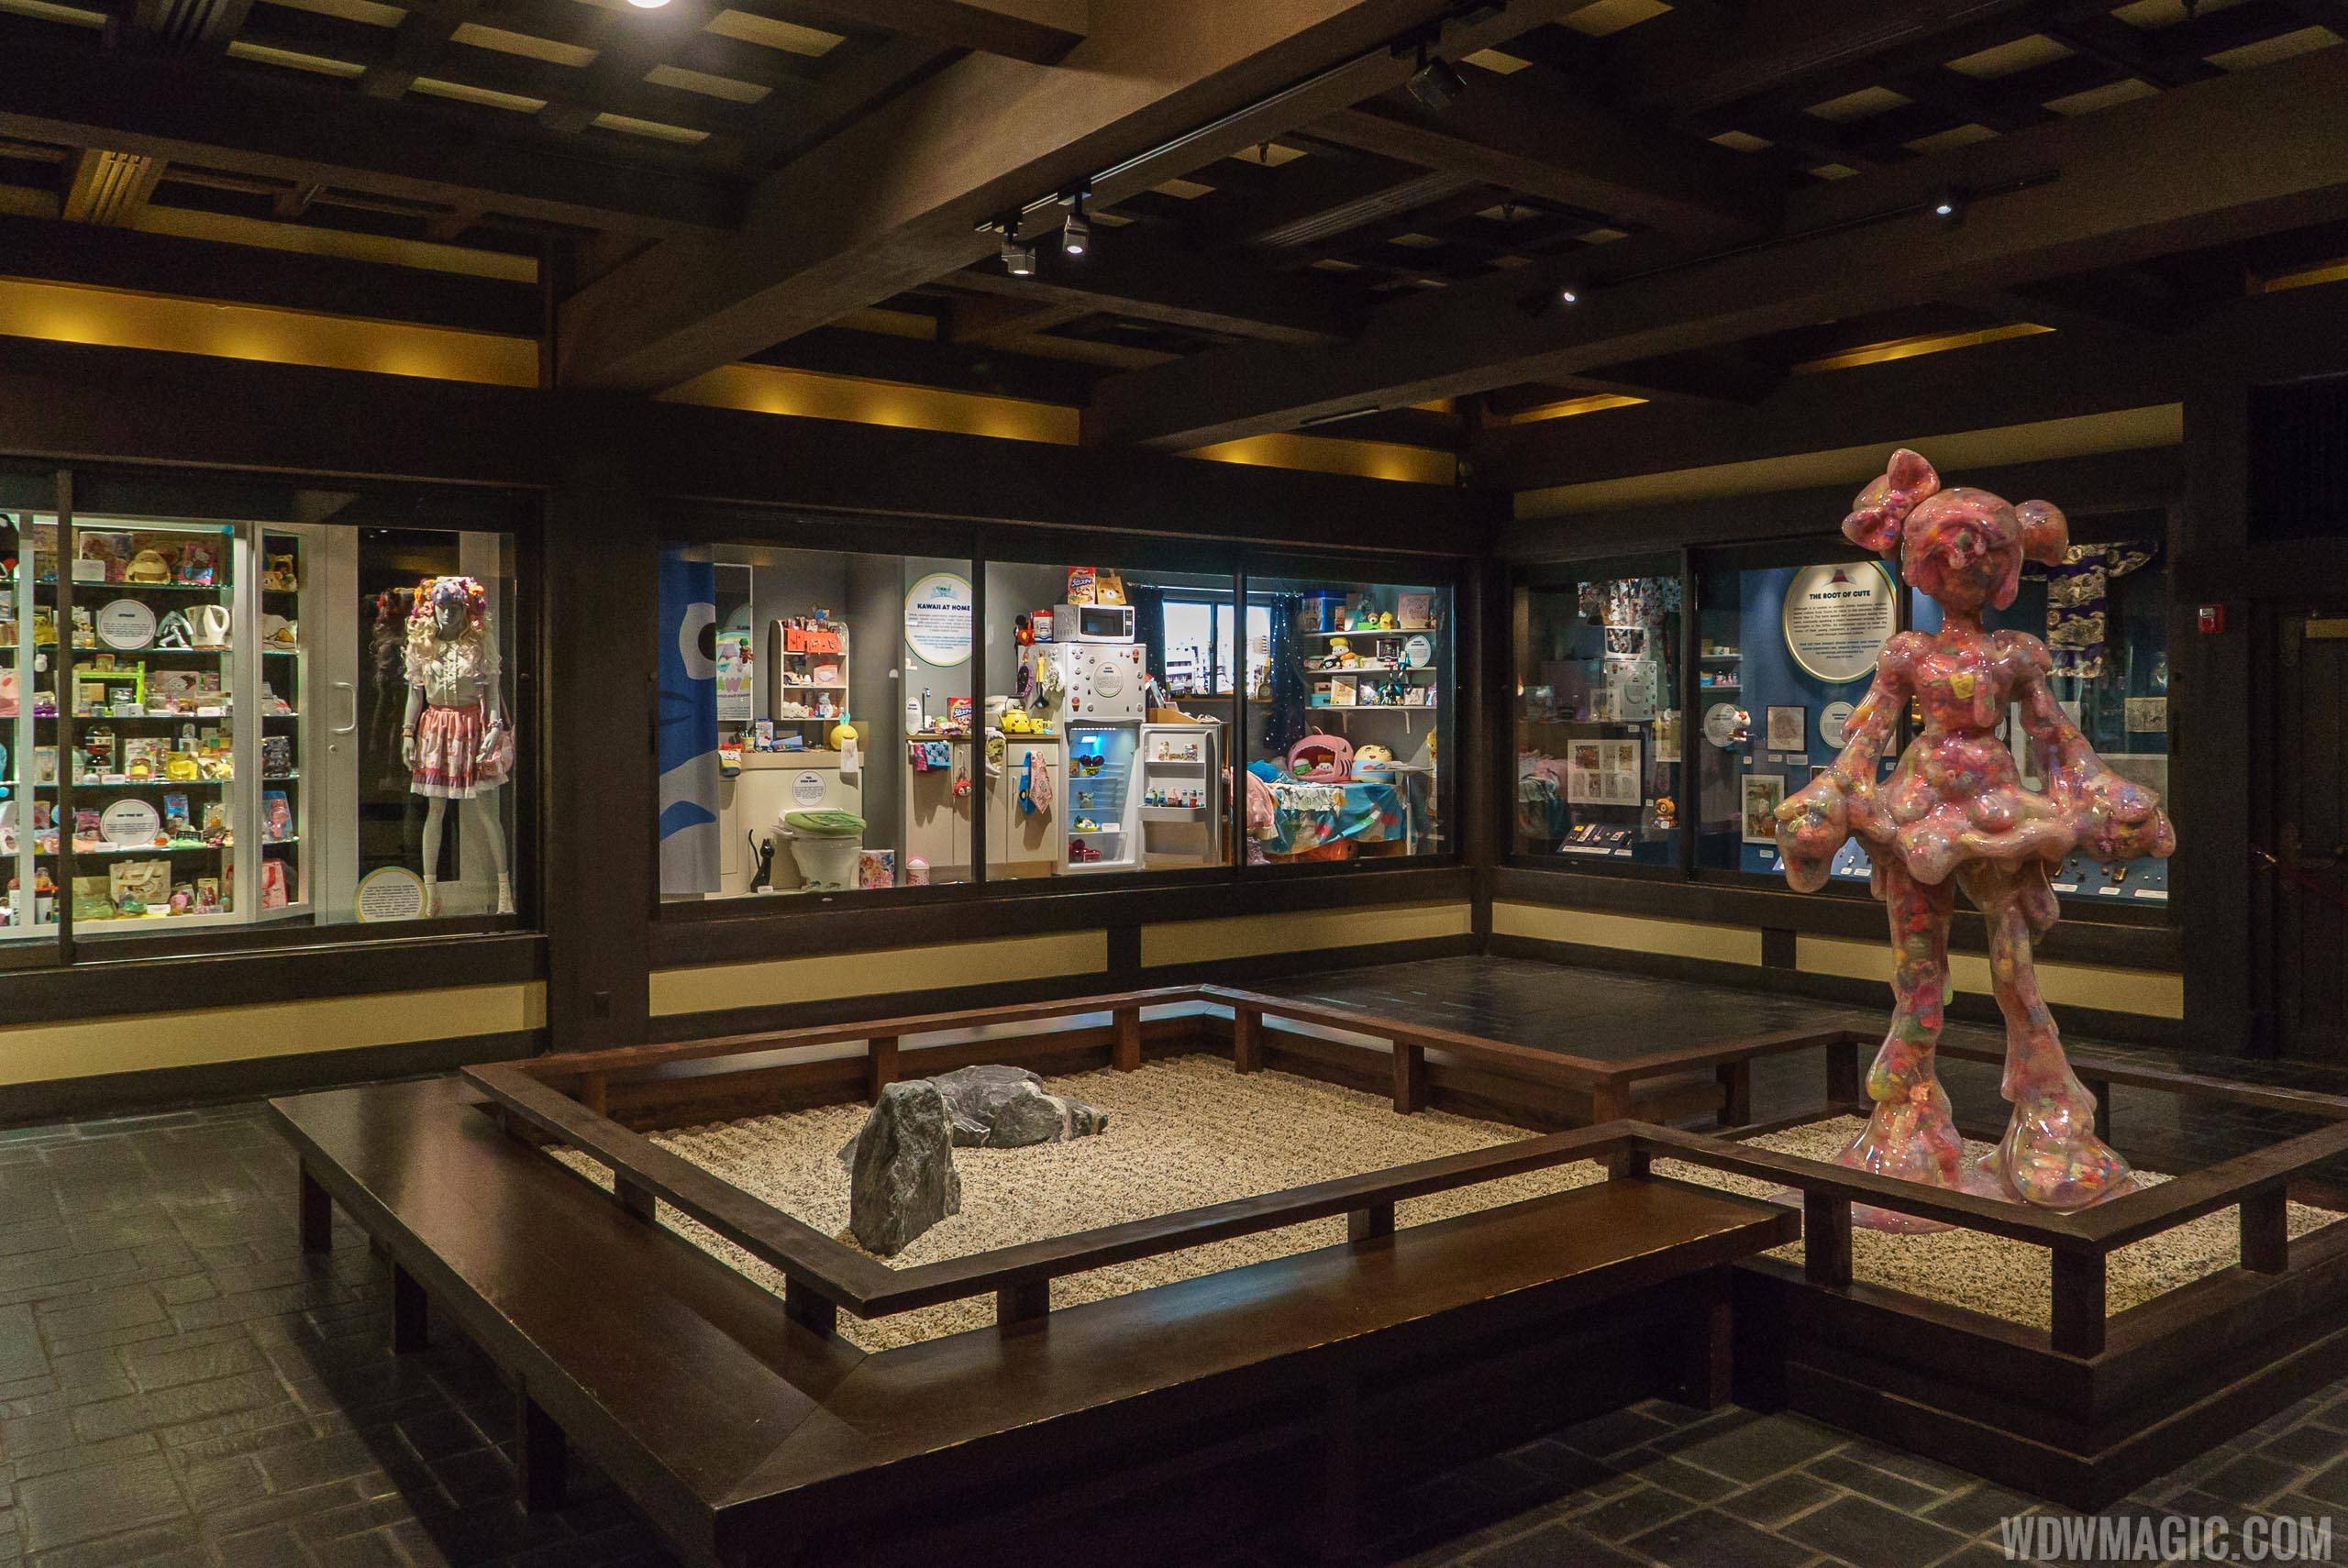 PHOTOS - Epcot's Japan Pavilion gallery updated with new 'Kawaii - Japan's Cute Culture' exhibit